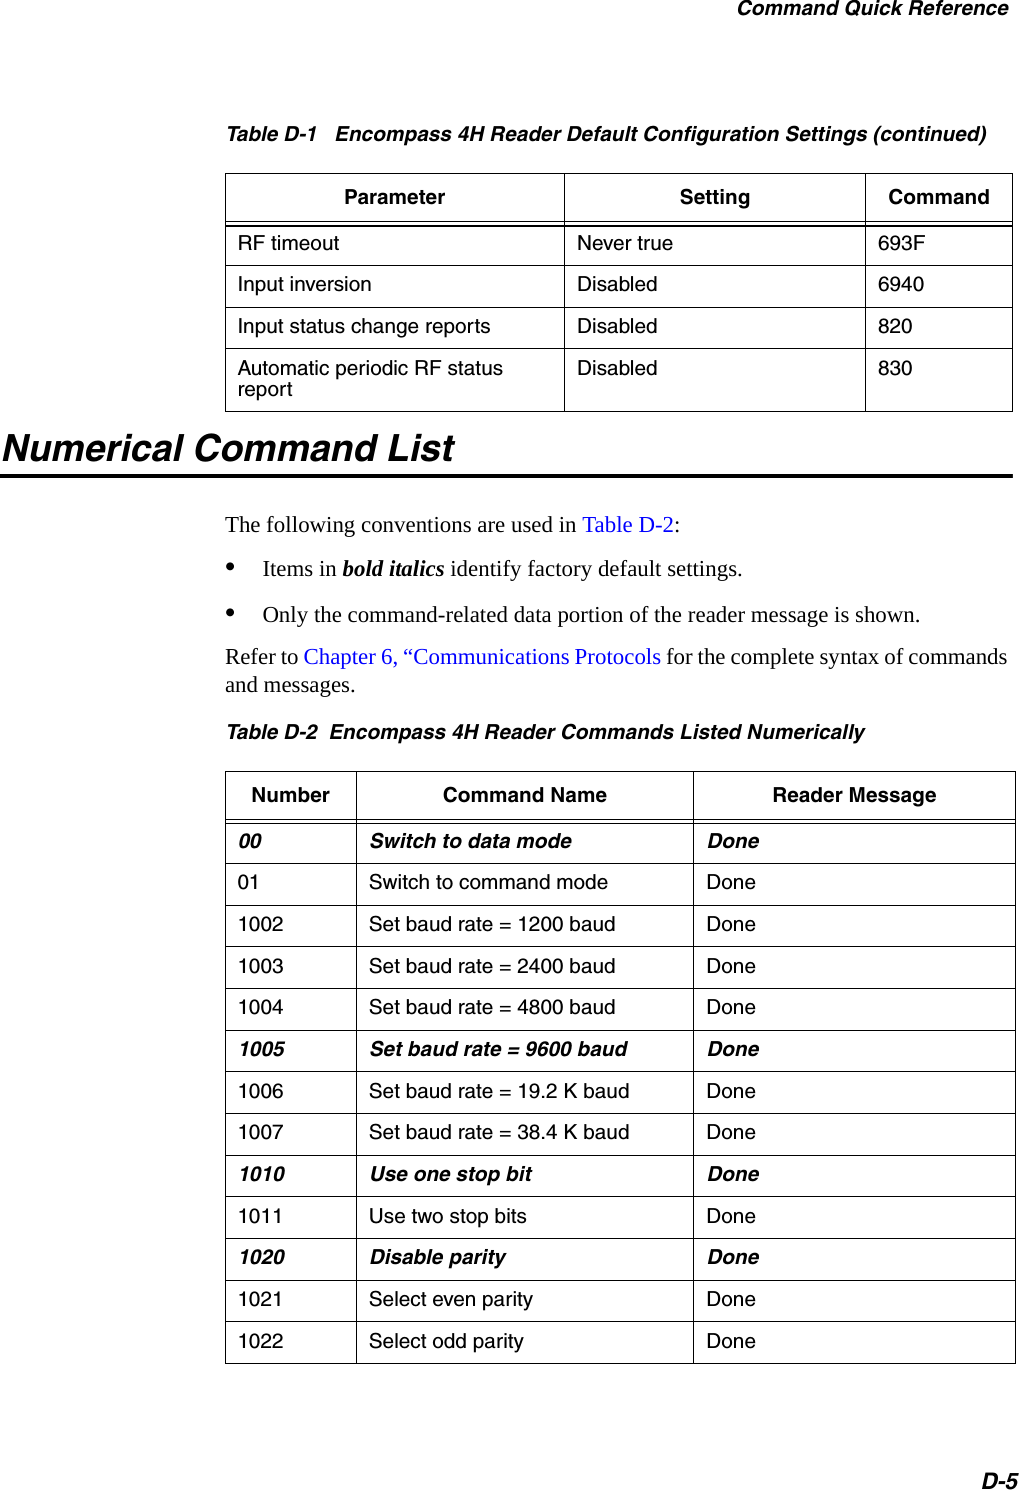 Command Quick ReferenceD-5Numerical Command ListThe following conventions are used in Table D-2: •Items in bold italics identify factory default settings.•Only the command-related data portion of the reader message is shown.Refer to Chapter 6, “Communications Protocols for the complete syntax of commands and messages. RF timeout Never true 693FInput inversion Disabled 6940Input status change reports Disabled 820Automatic periodic RF status reportDisabled 830Table D-1   Encompass 4H Reader Default Configuration Settings (continued)Parameter Setting CommandTable D-2  Encompass 4H Reader Commands Listed Numerically Number Command Name Reader Message00 Switch to data mode Done01 Switch to command mode Done1002 Set baud rate = 1200 baud Done1003 Set baud rate = 2400 baud Done1004 Set baud rate = 4800 baud Done1005 Set baud rate = 9600 baud Done1006 Set baud rate = 19.2 K baud Done1007 Set baud rate = 38.4 K baud Done1010 Use one stop bit Done1011 Use two stop bits Done1020 Disable parity Done1021 Select even parity Done1022 Select odd parity Done